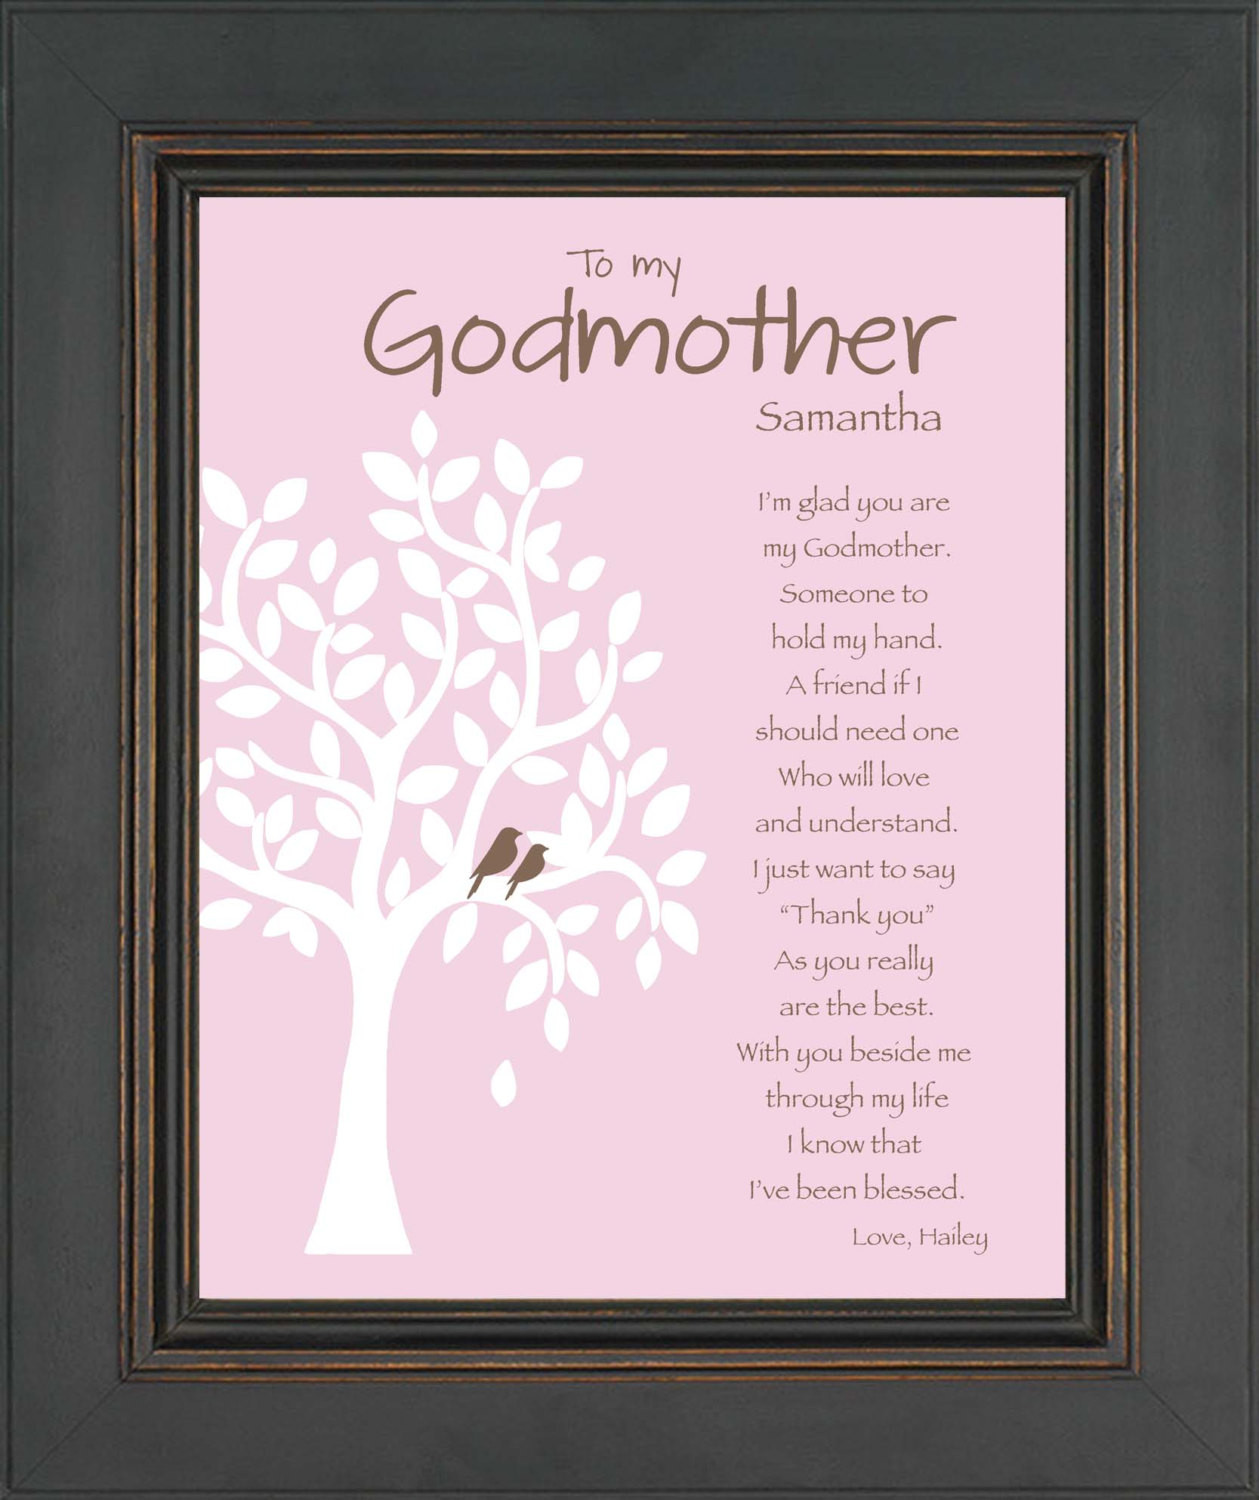 Birthday Gift Ideas For Godmother
 GODMOTHER Gift 8x10 Print Personalized Godmother Print